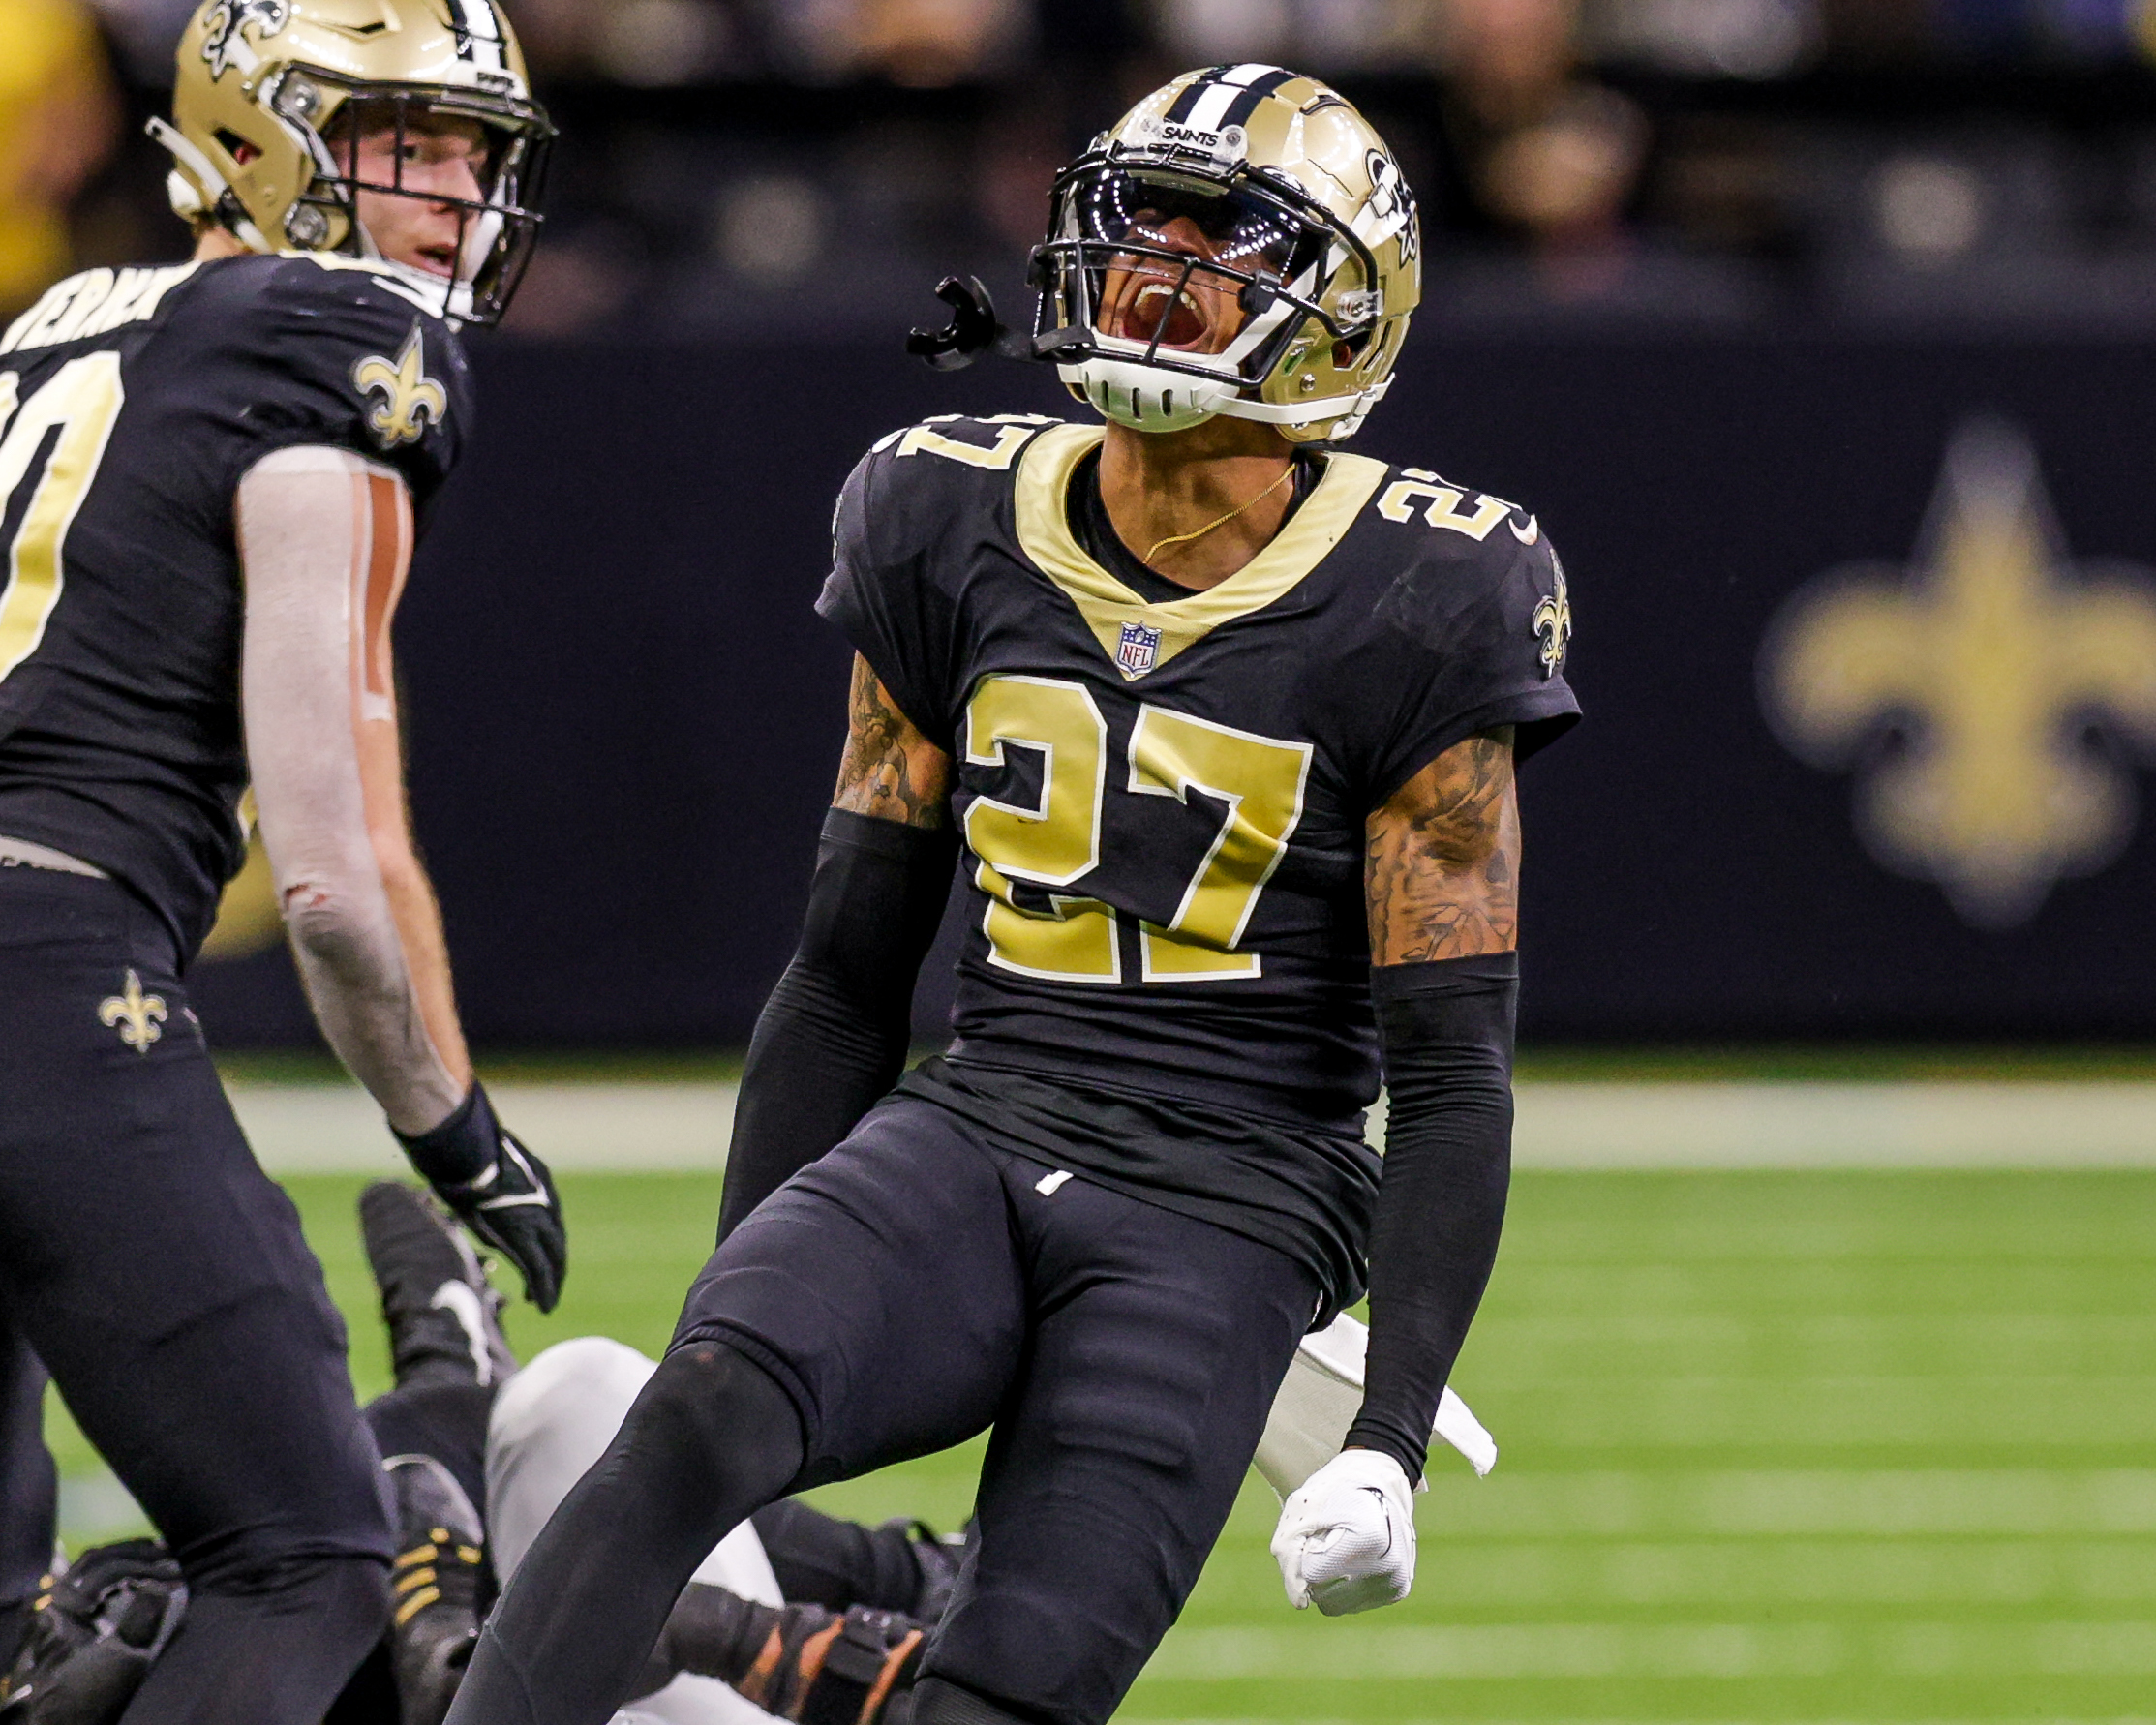 Ross Jackson on X: '#Saints rookie Alontae Taylor is really good. Per PFF,  among CBs with 200+ coverage snaps: - 63.8 passer rating when targeted (6th  lowest) - 49% completion percentage allowed (